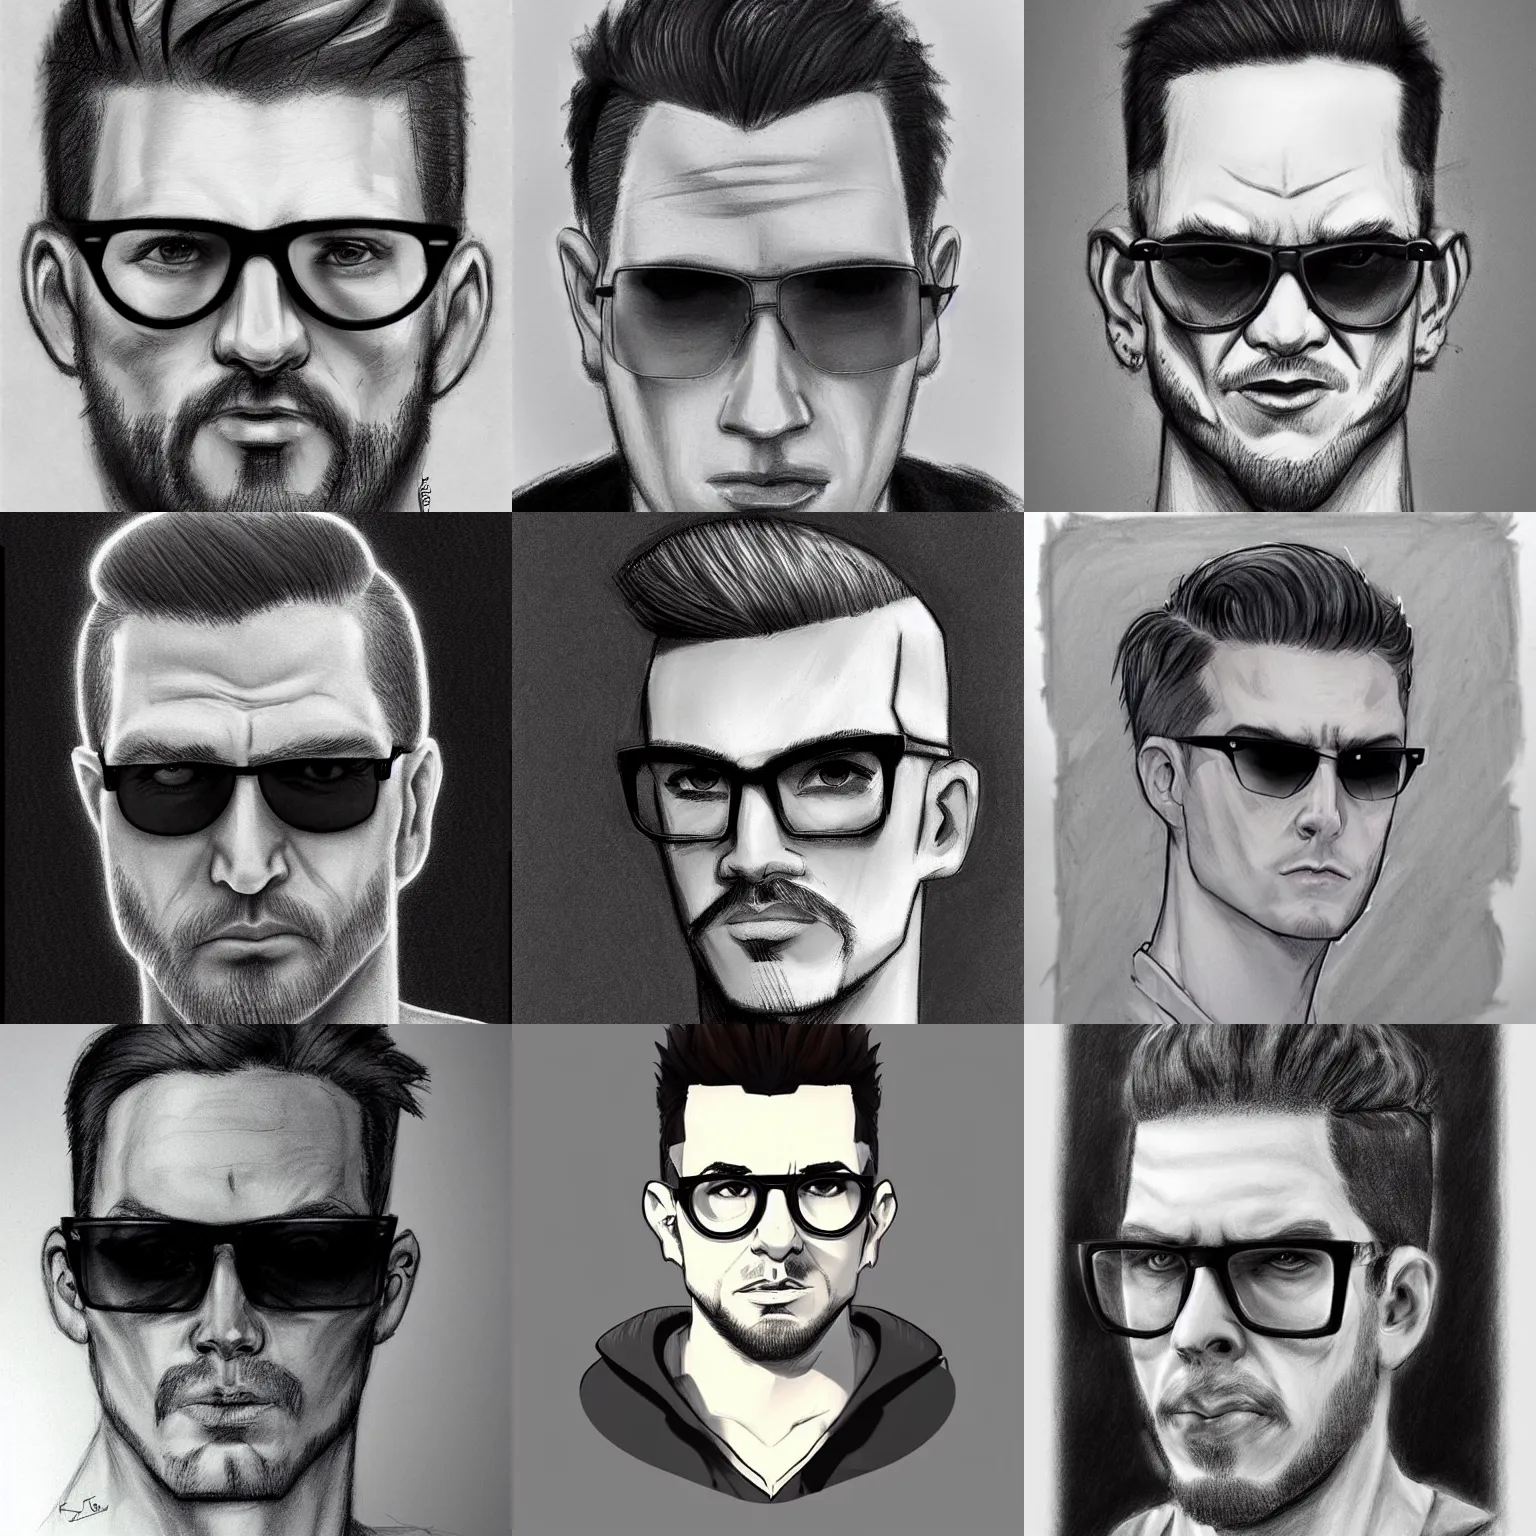 Prompt: artstation style white man, short curly, undercut hairstyle, short goatee, ray - ban glasses, menacing look, charcoal drawing